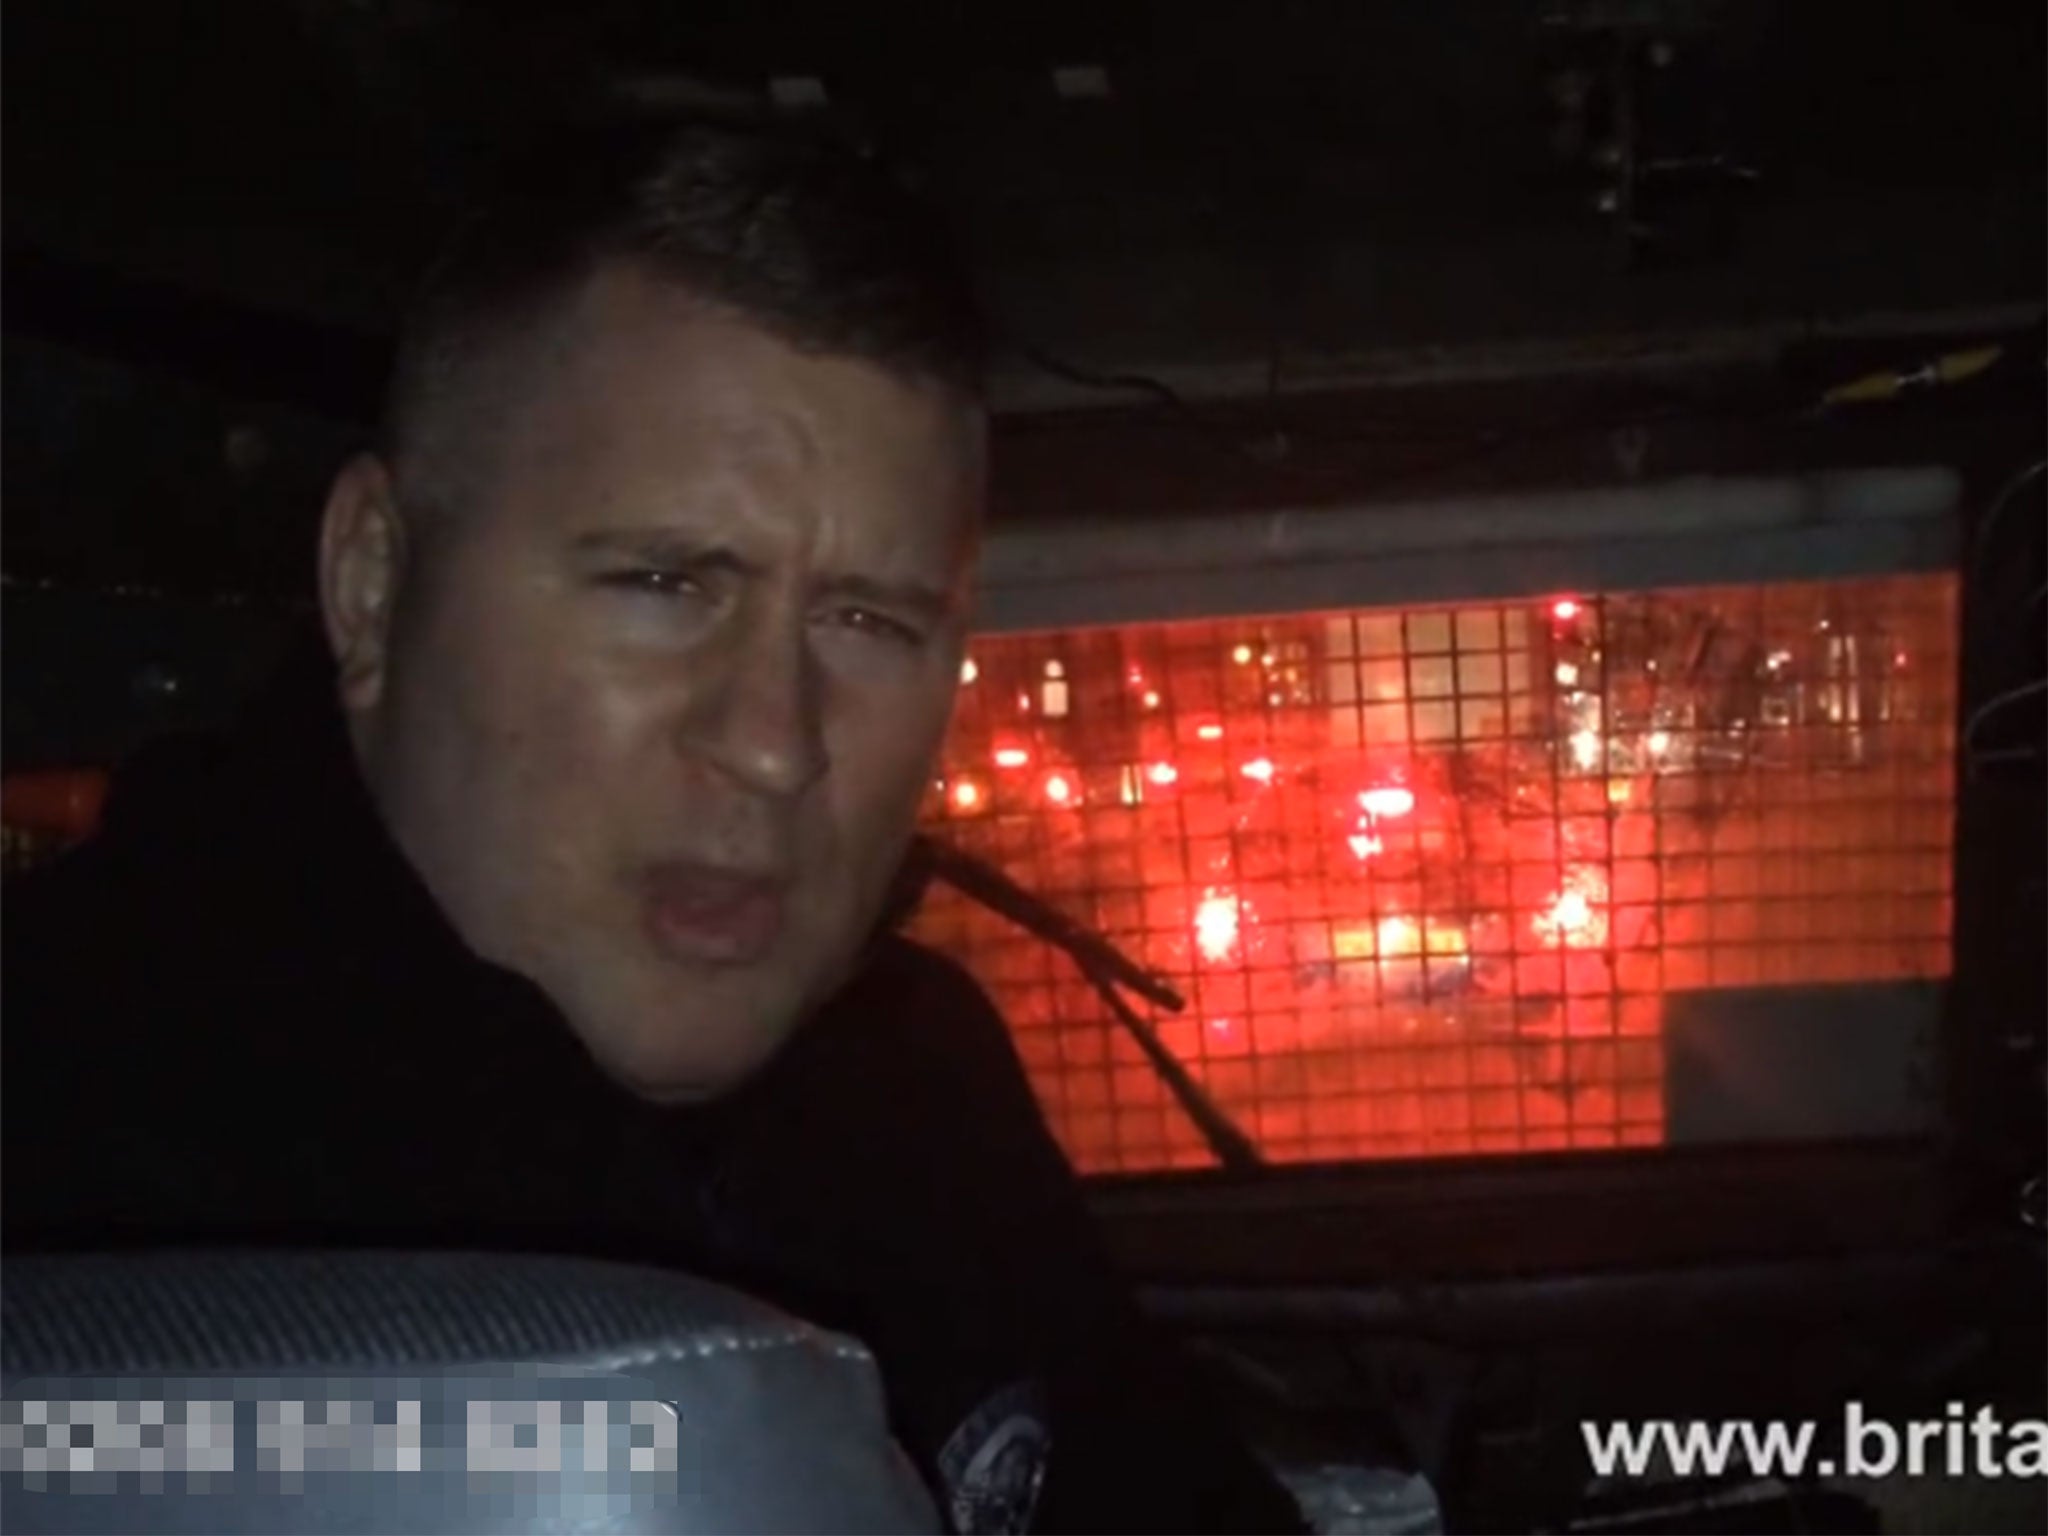 Britain First's chairman Paul Golding on the way to the "Christian Patrol"